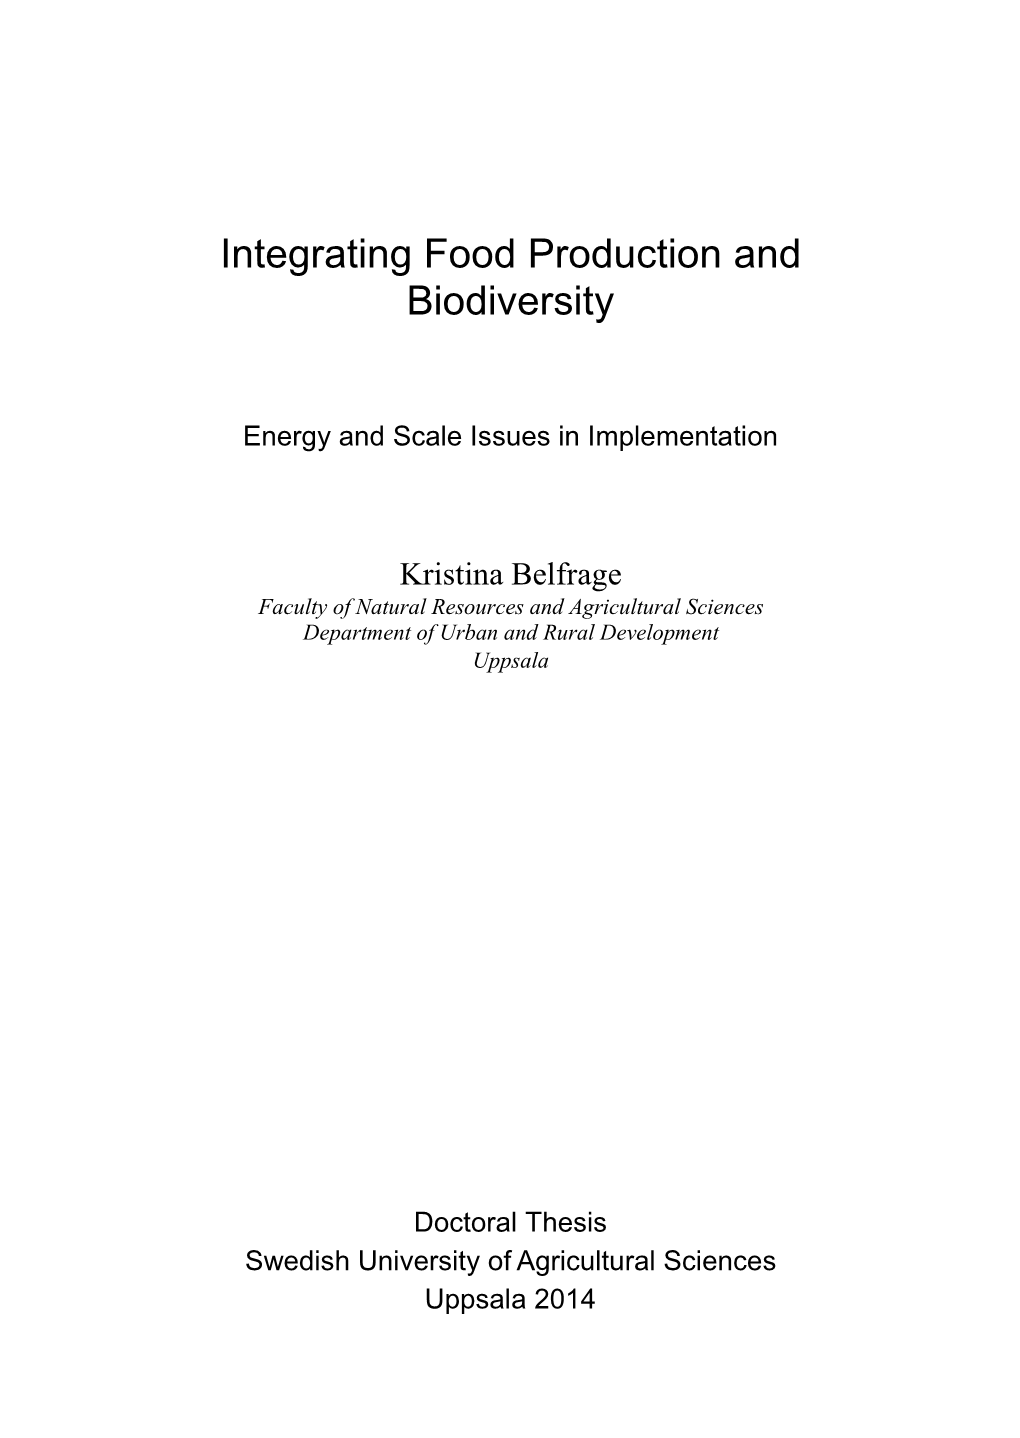 Integrating Food Production and Biodiversity